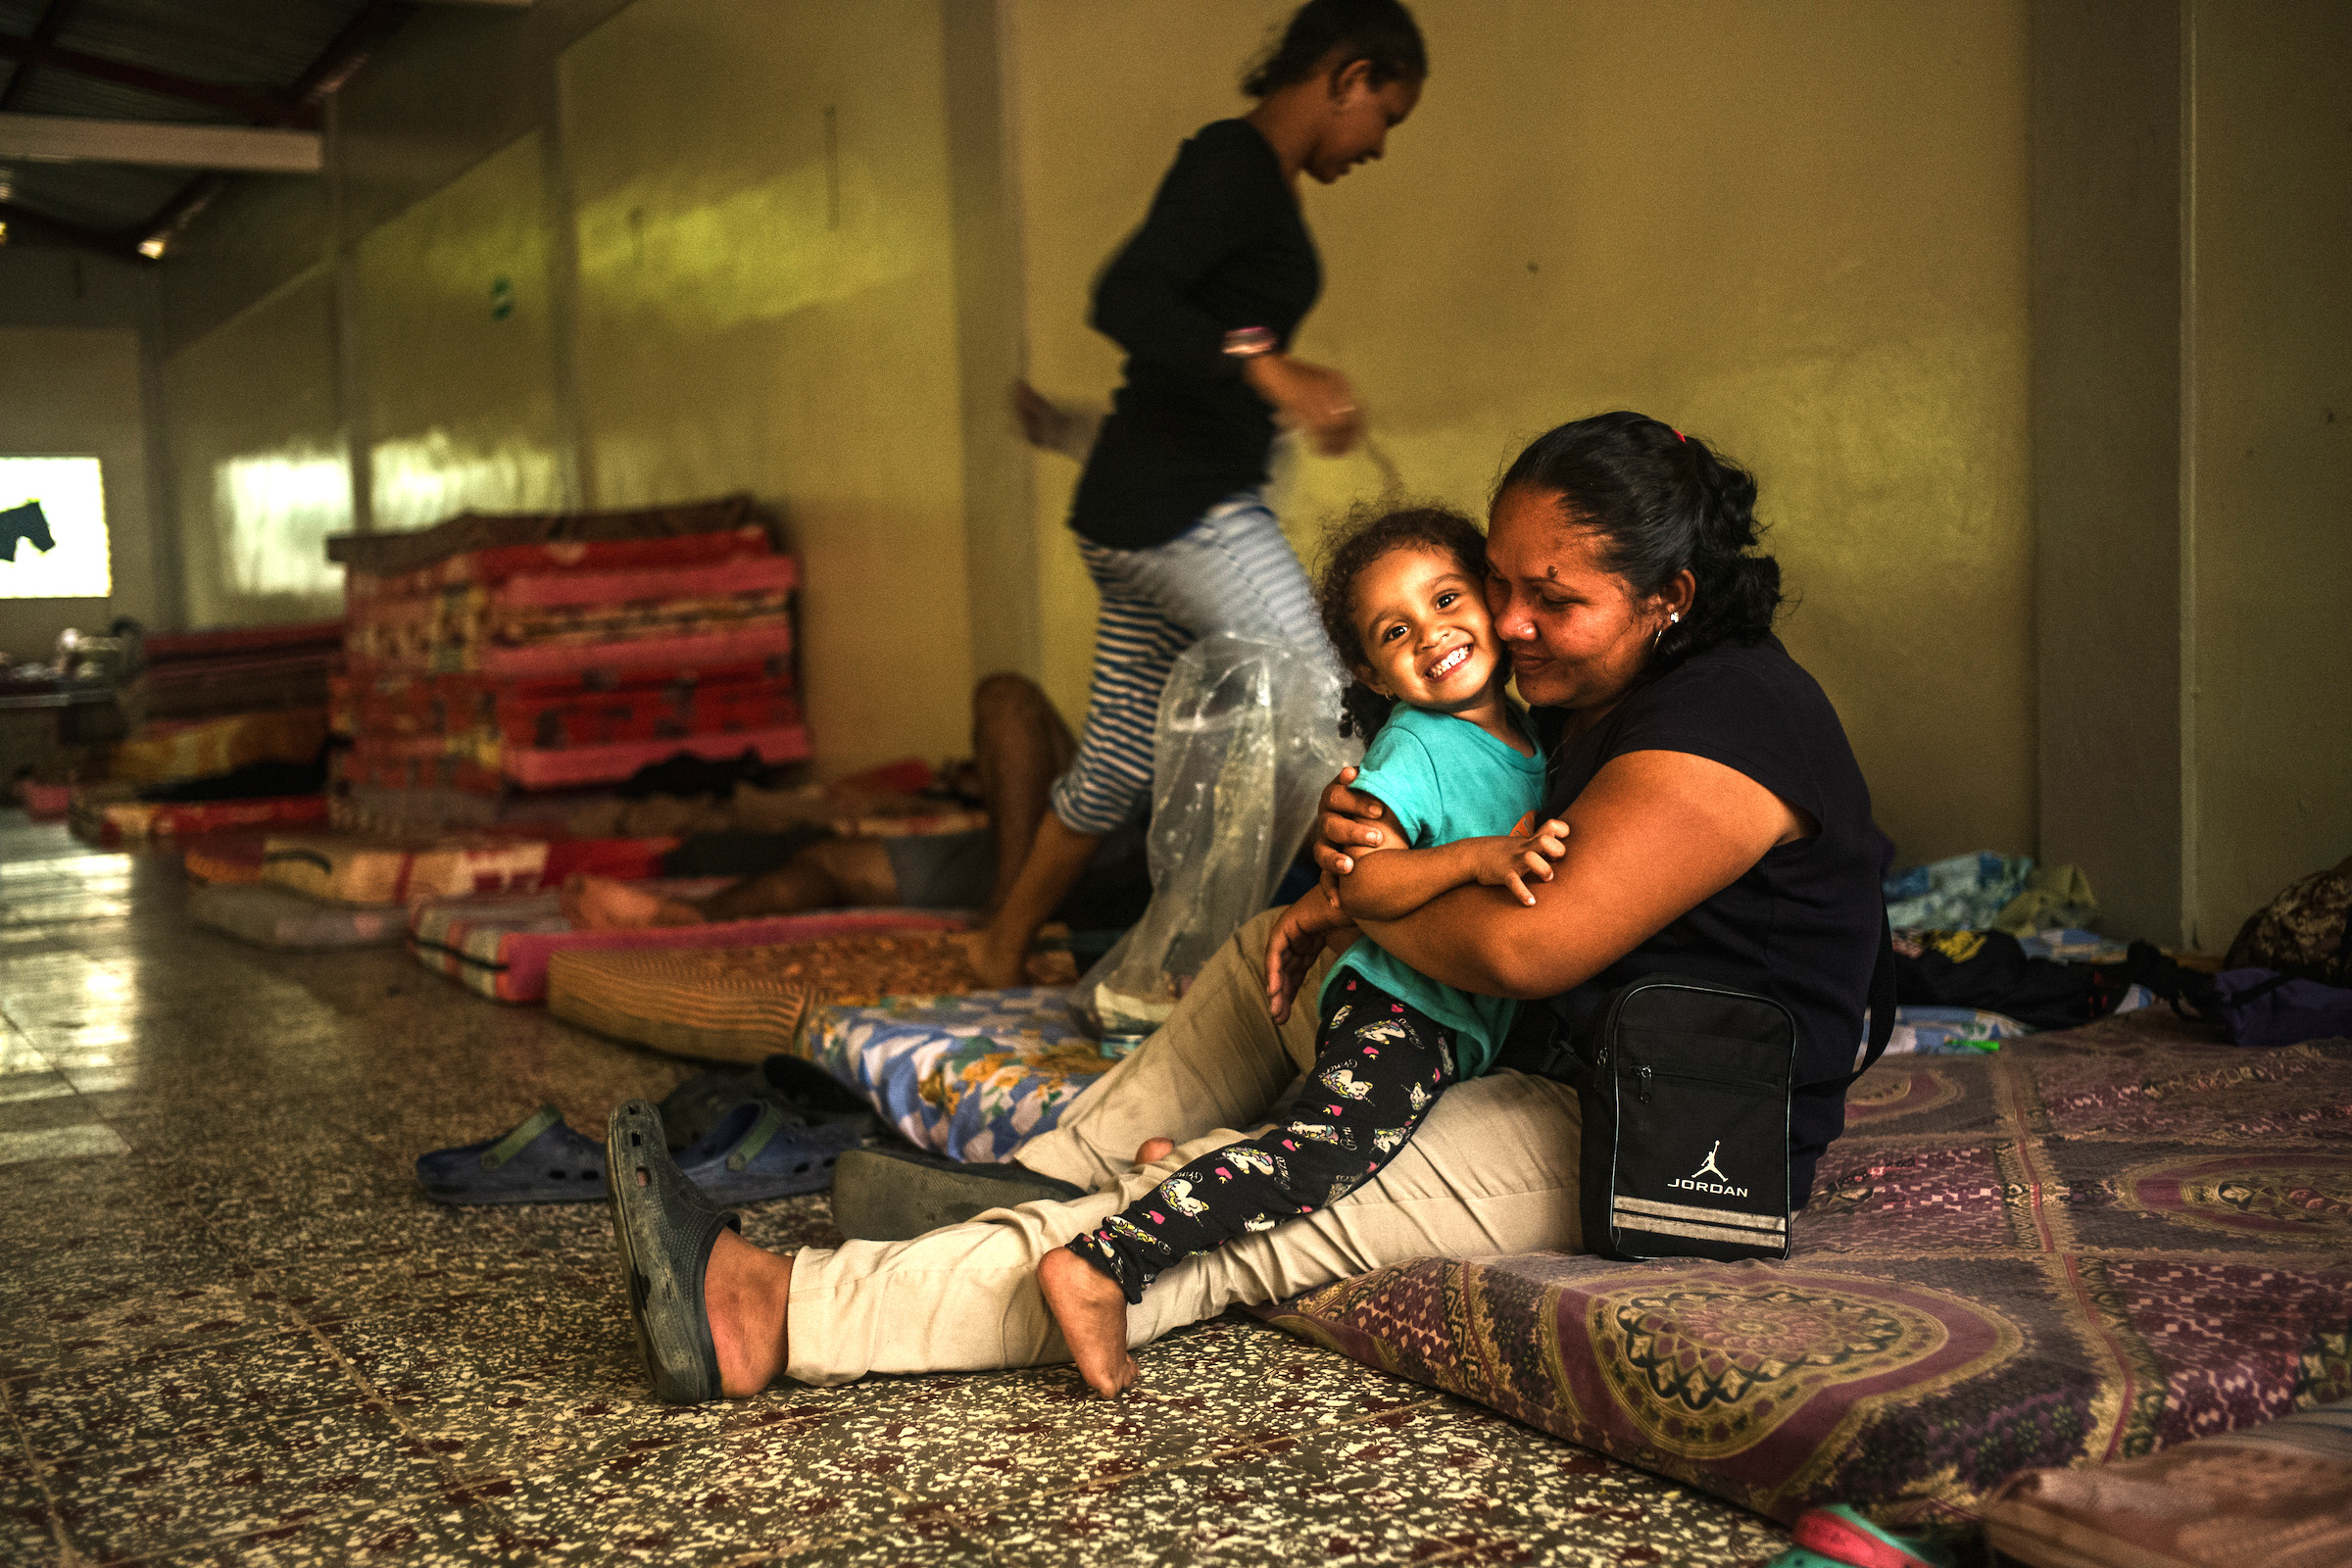 A woman and a smiling girl sit on a mattress on the ground.